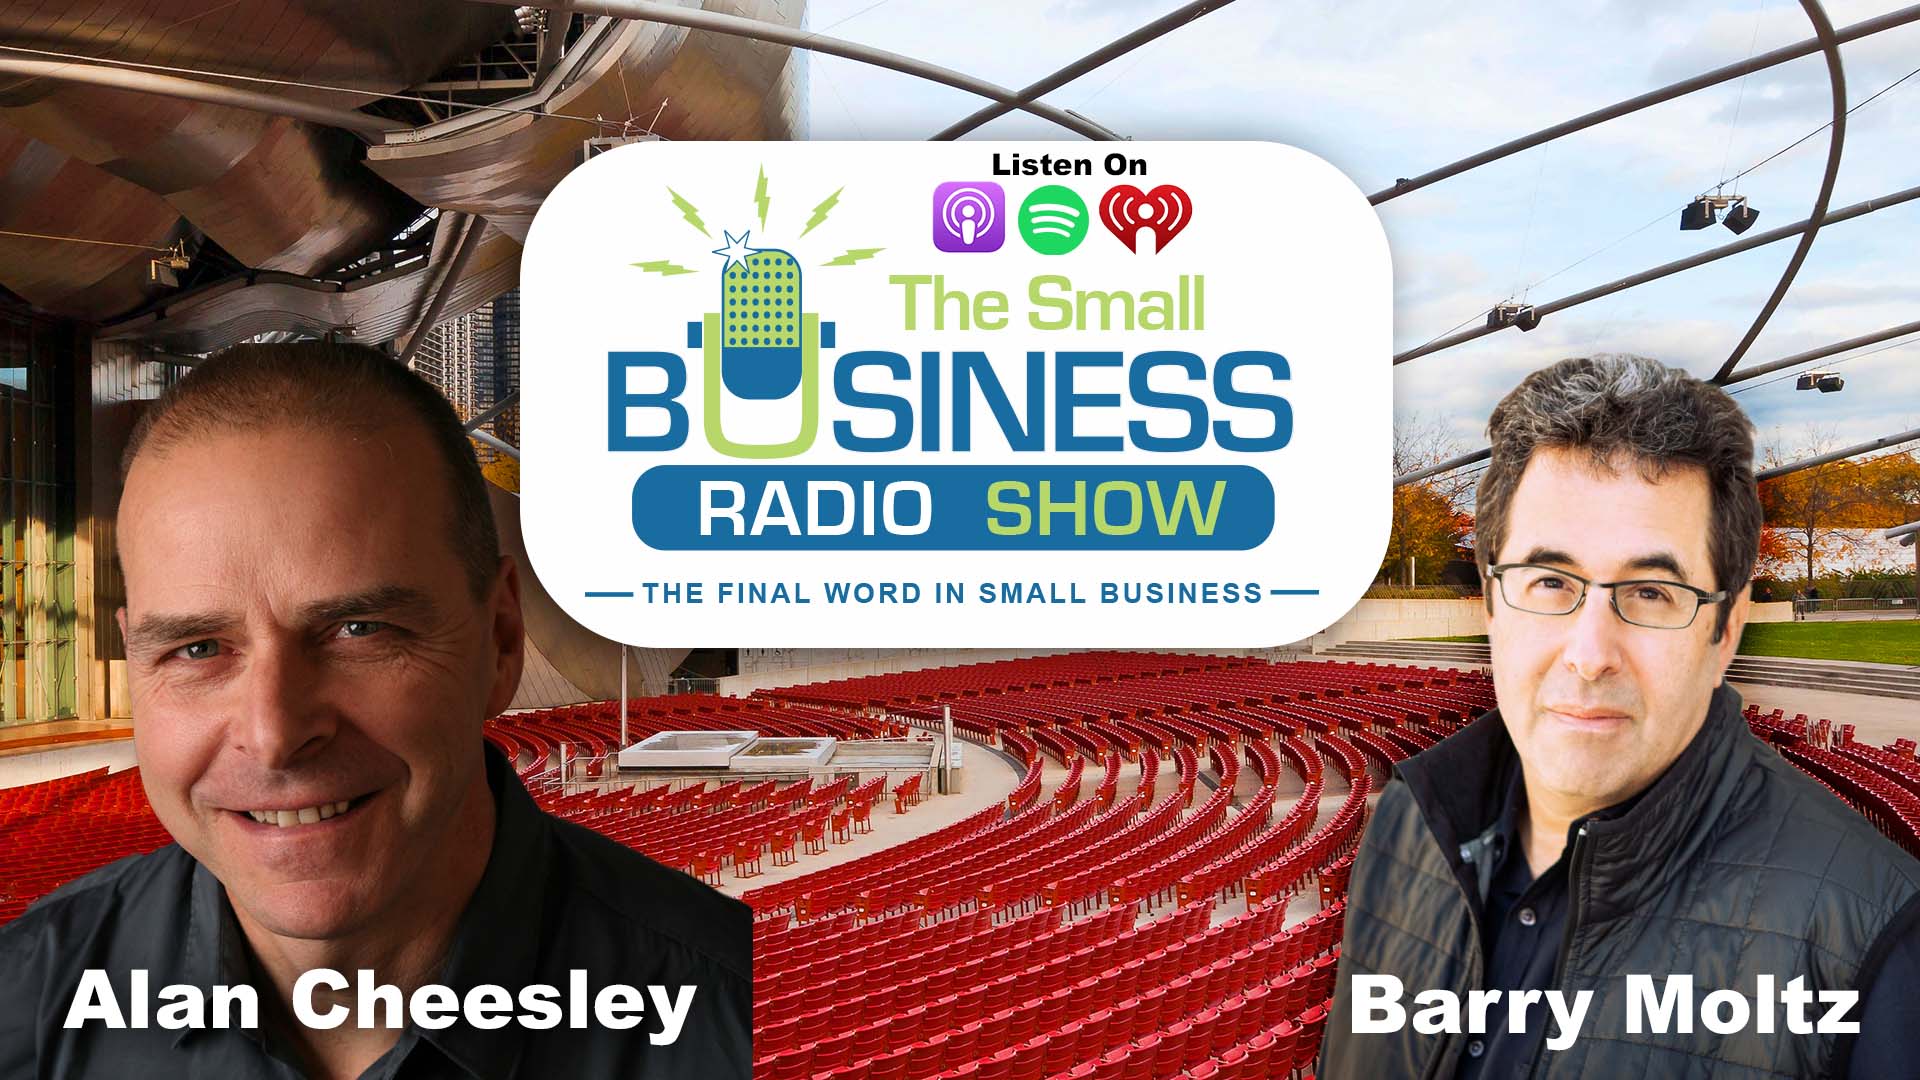 Alan Cheesley on The Small Business Radio Show automation